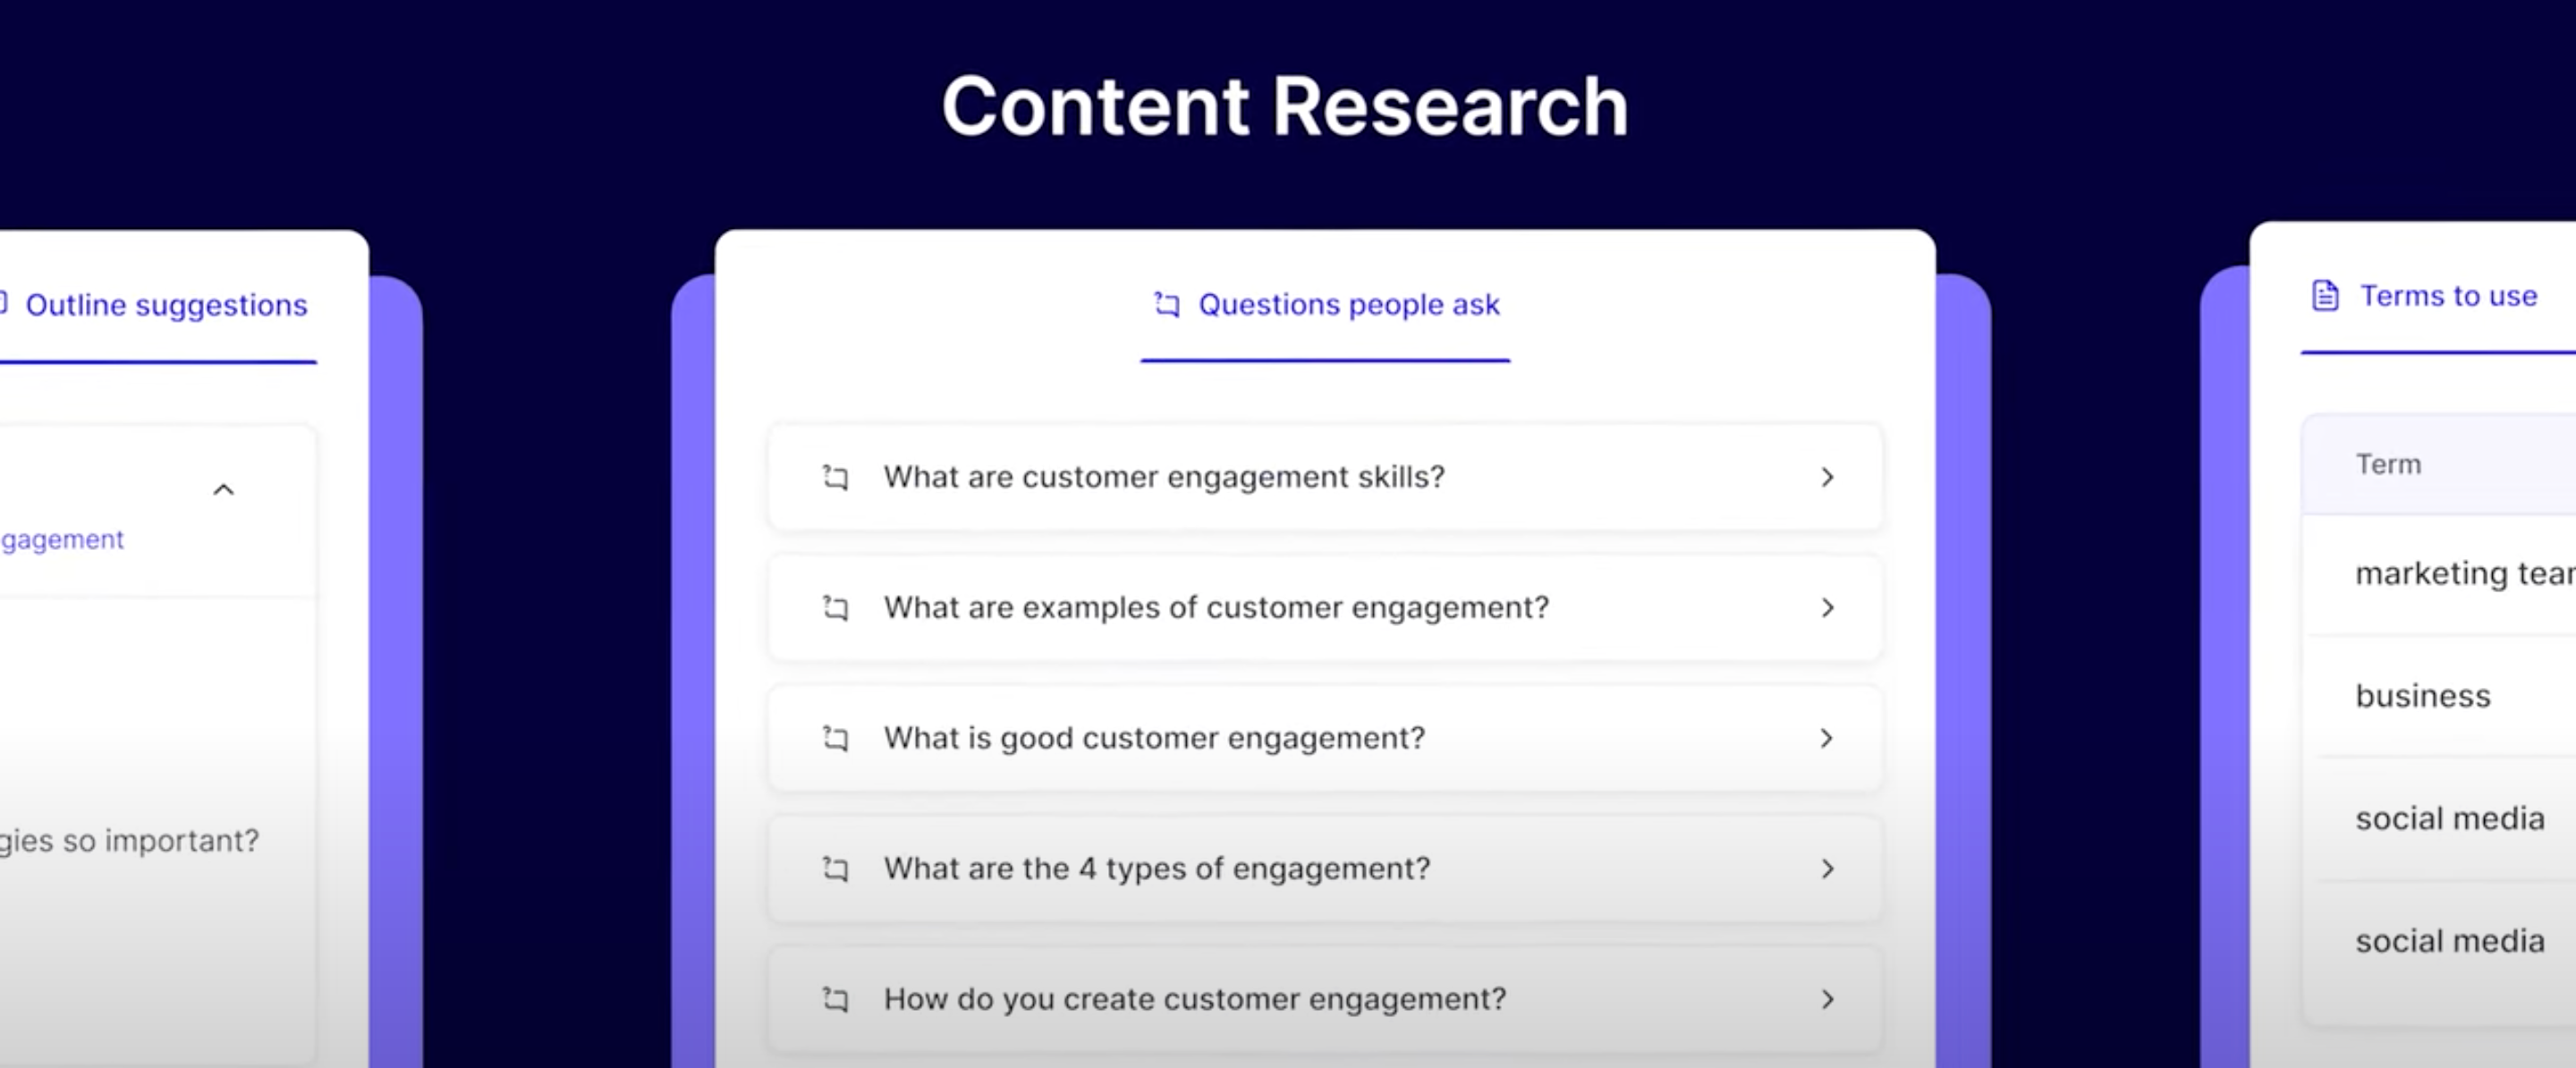 Peppertype's Content Research UX - Questions People Ask